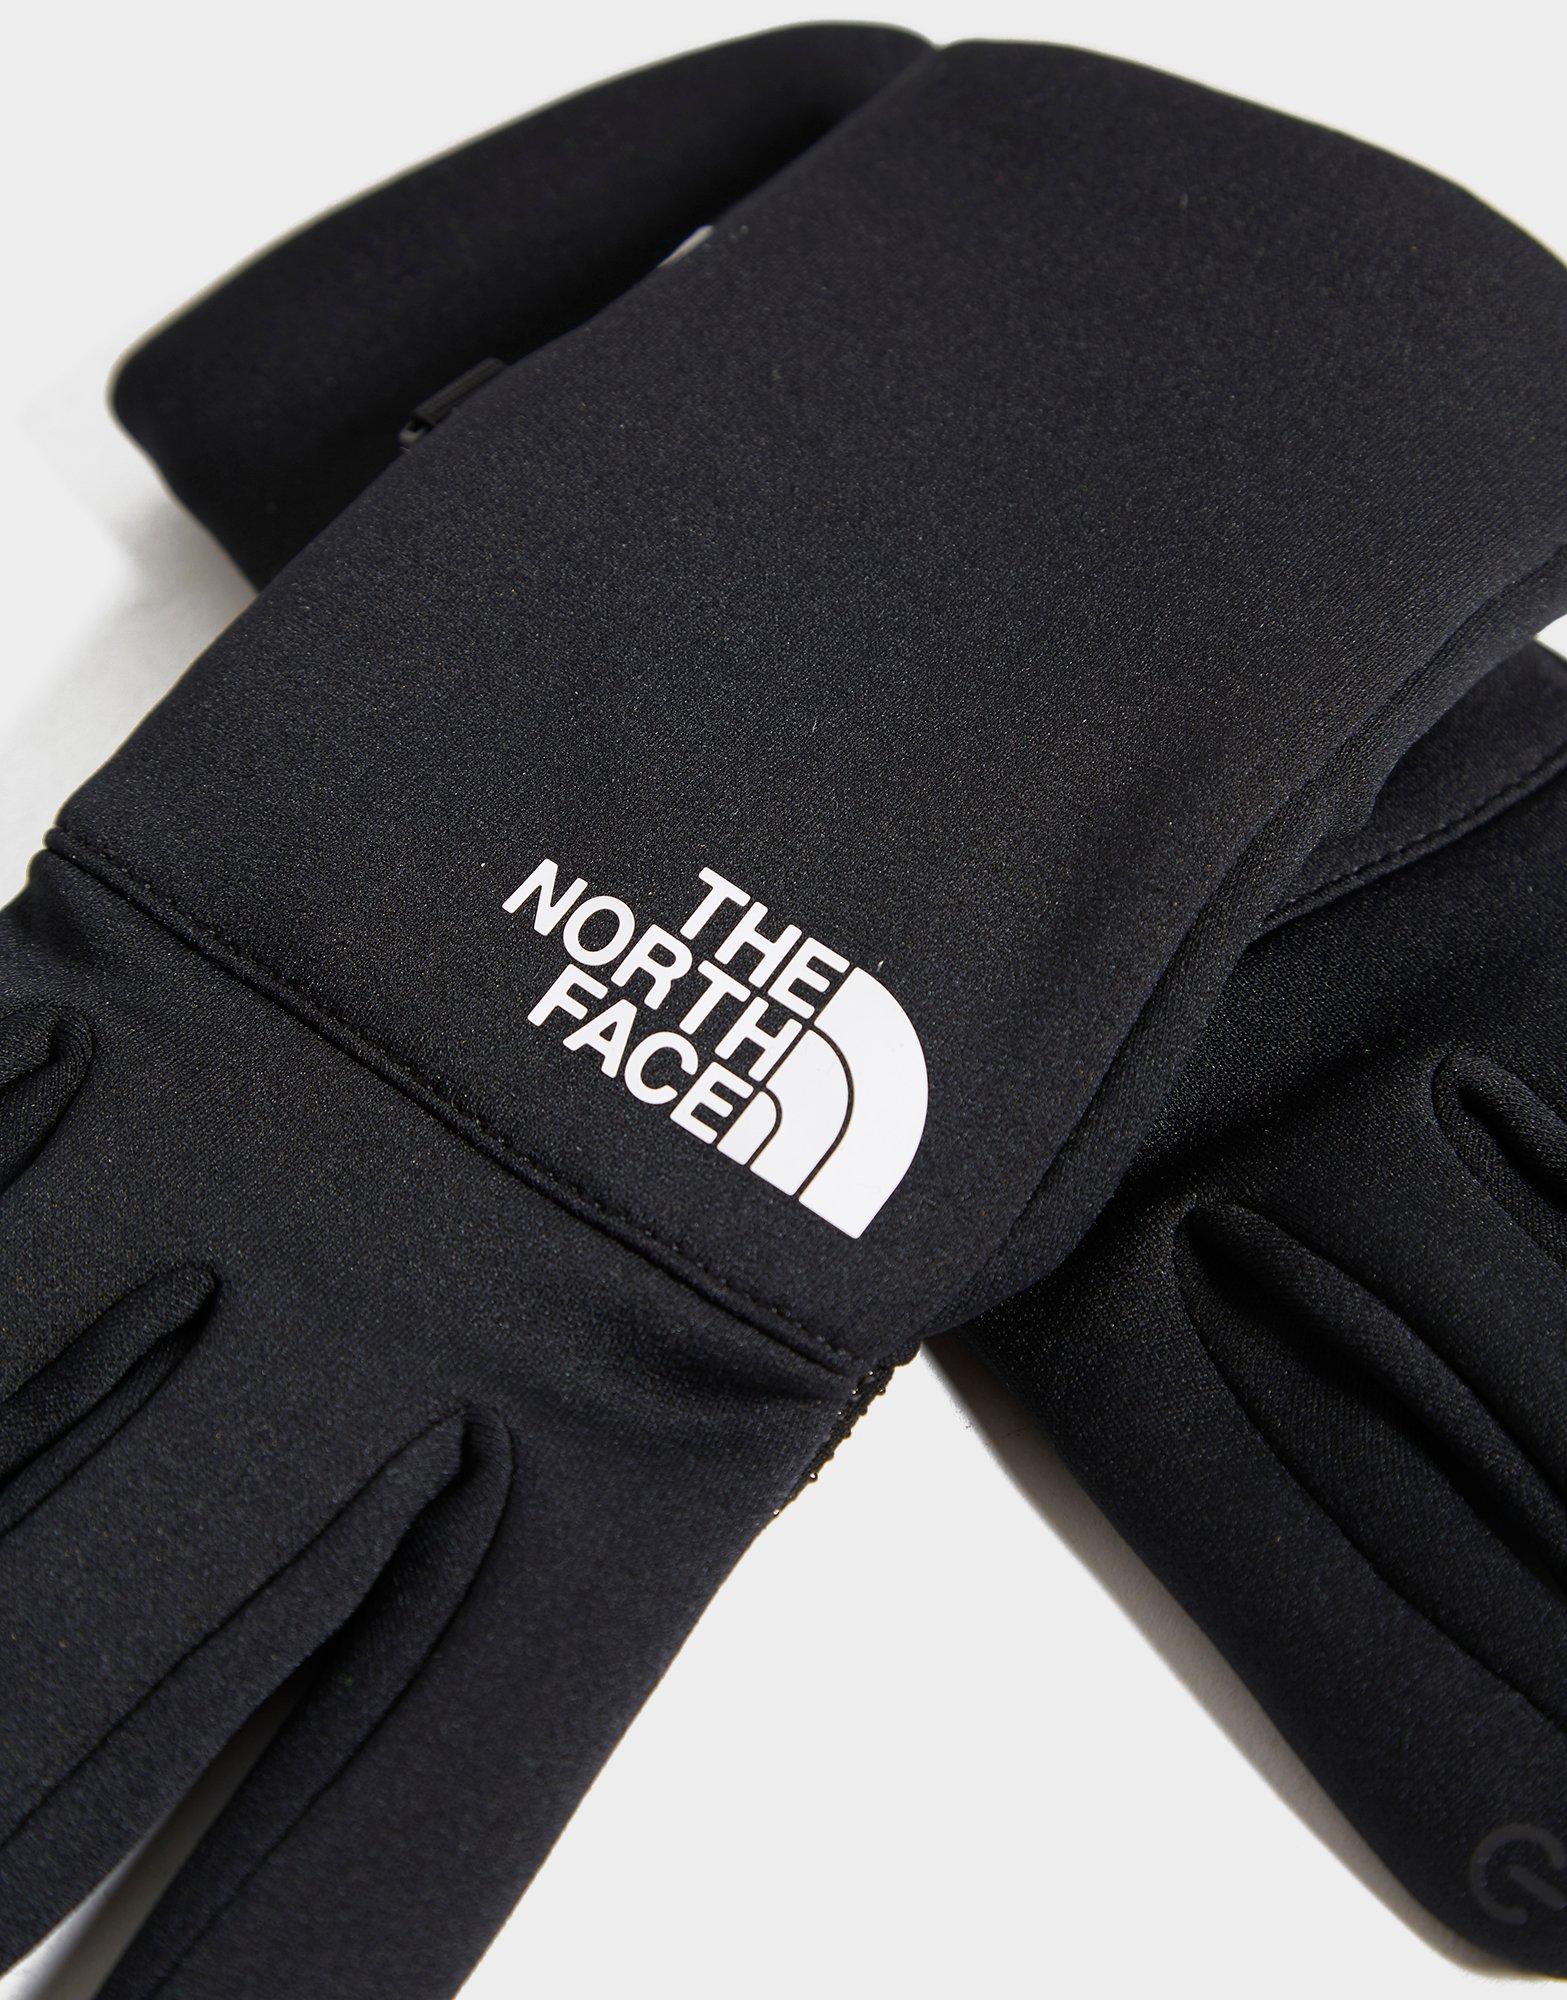 jd sports north face gloves